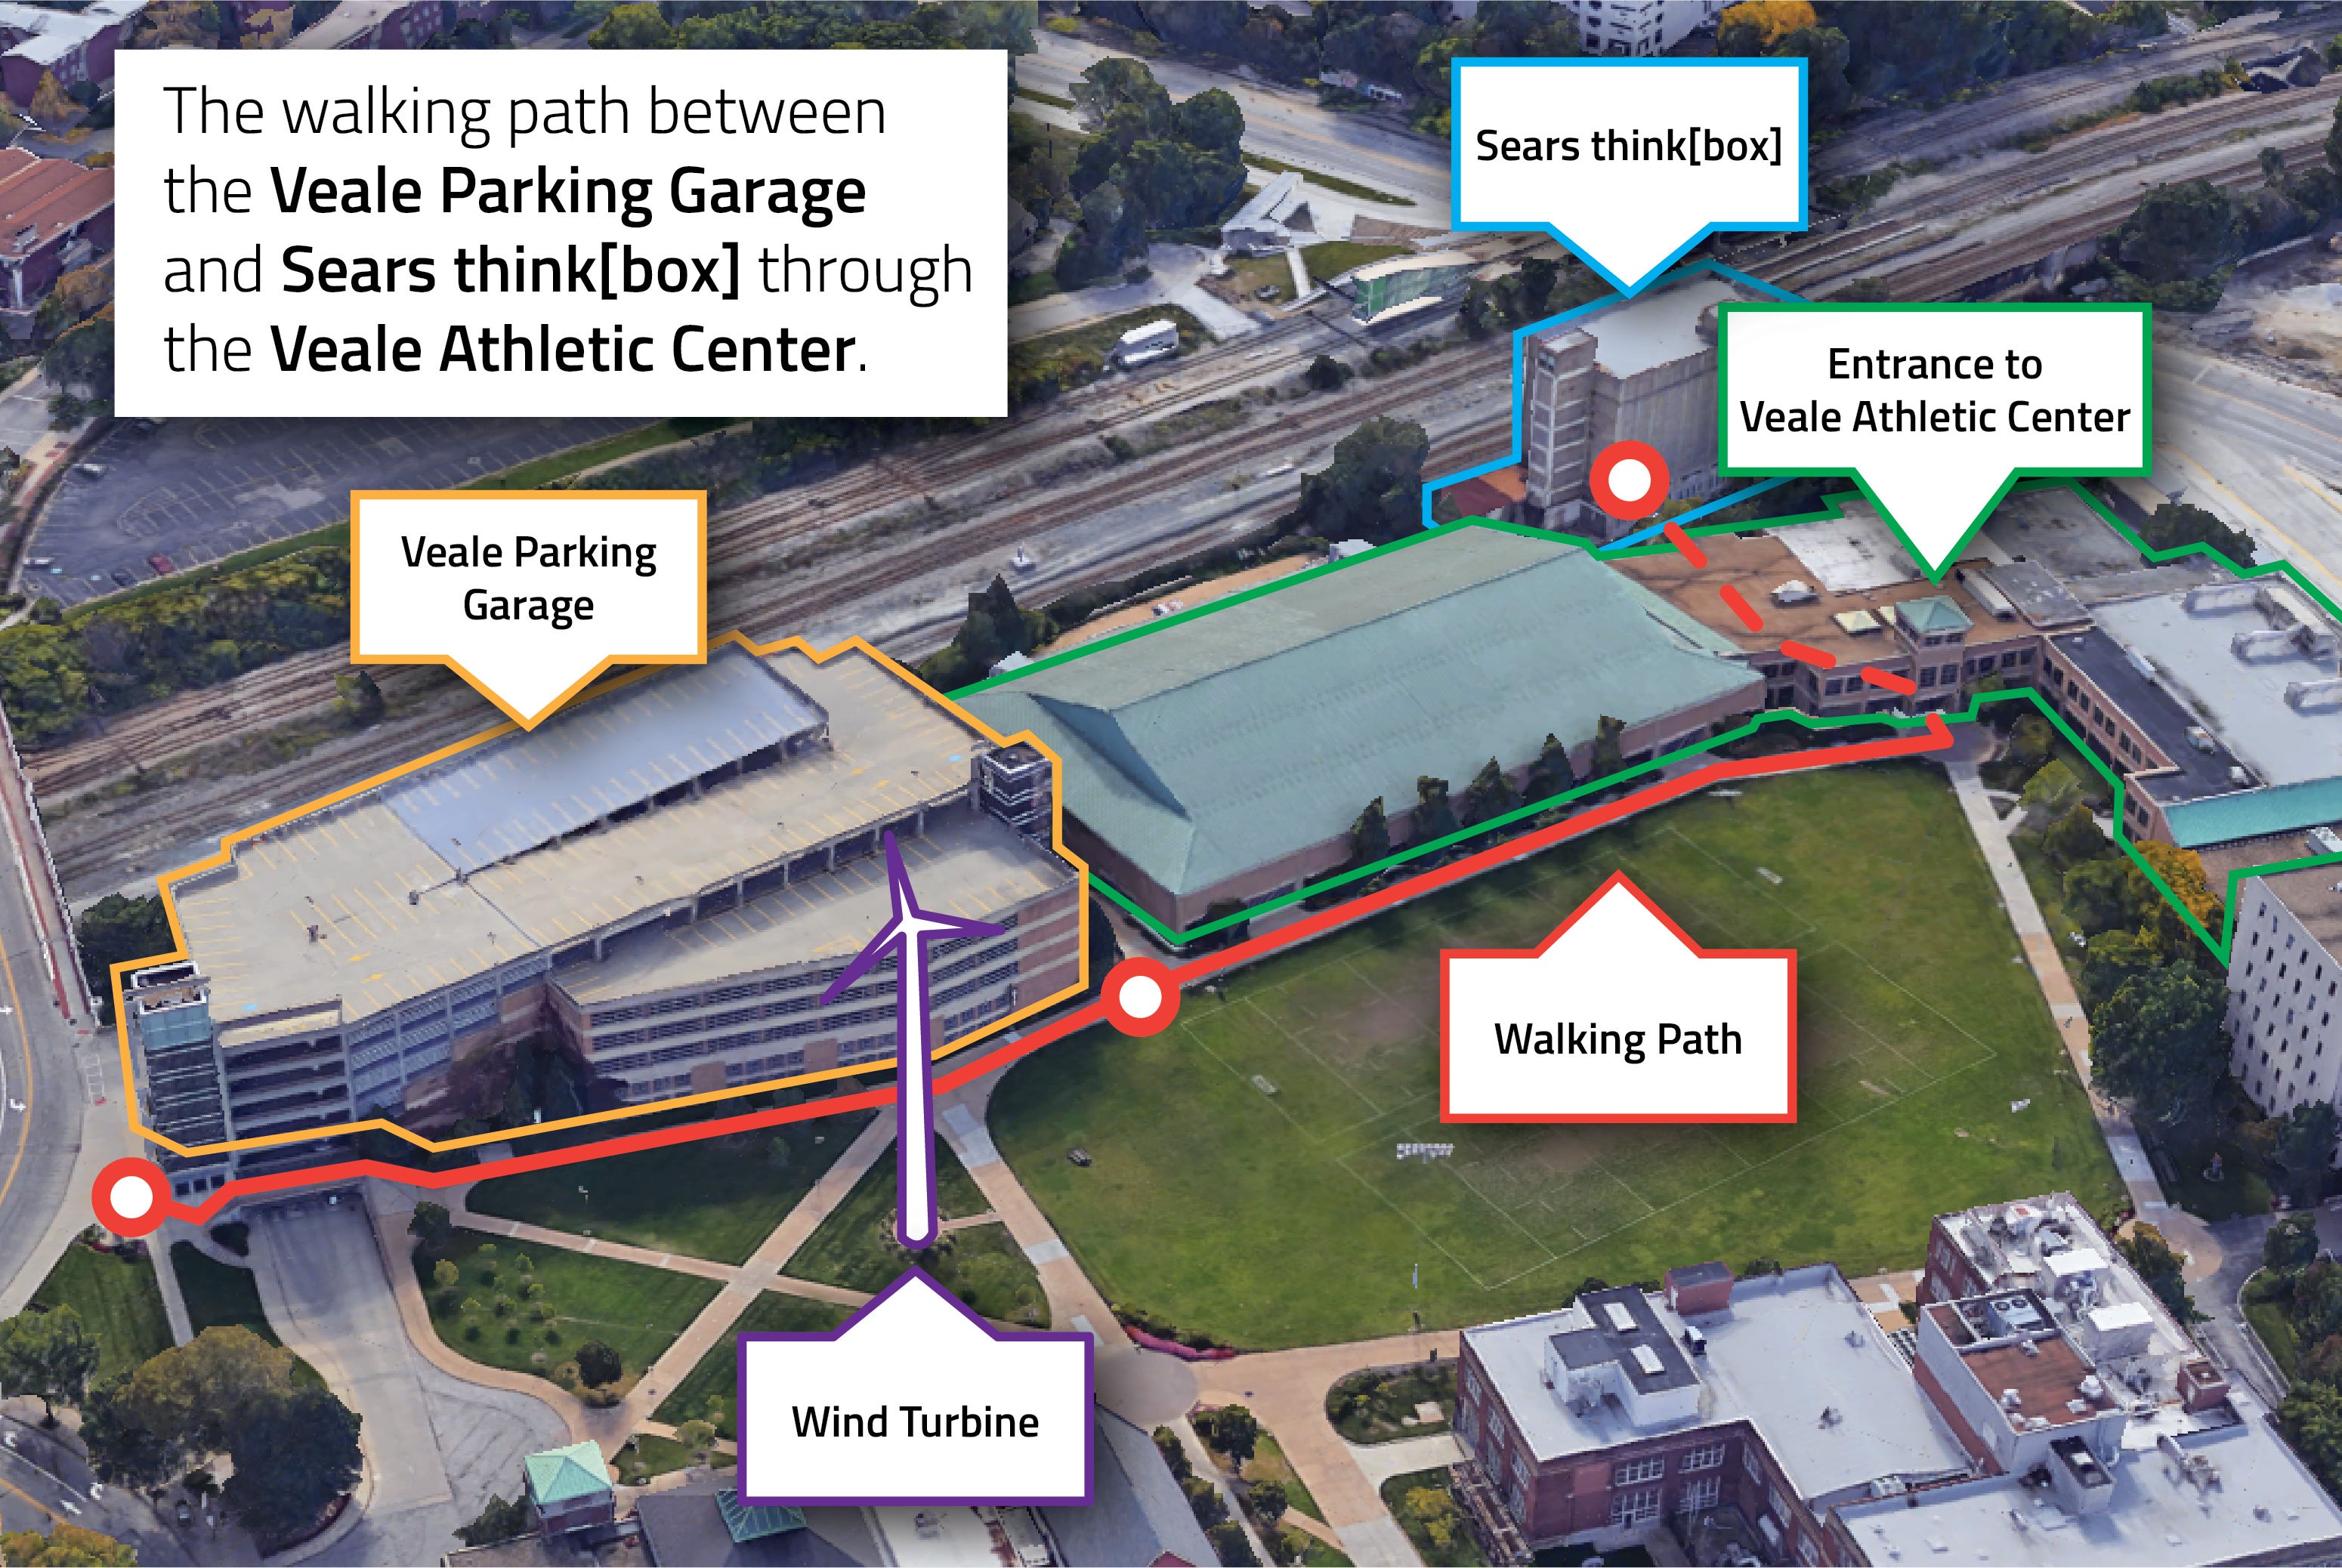 A map of the walking path between the Veale Parking Garage and Sears think[box] through the Veale Athletic Center.